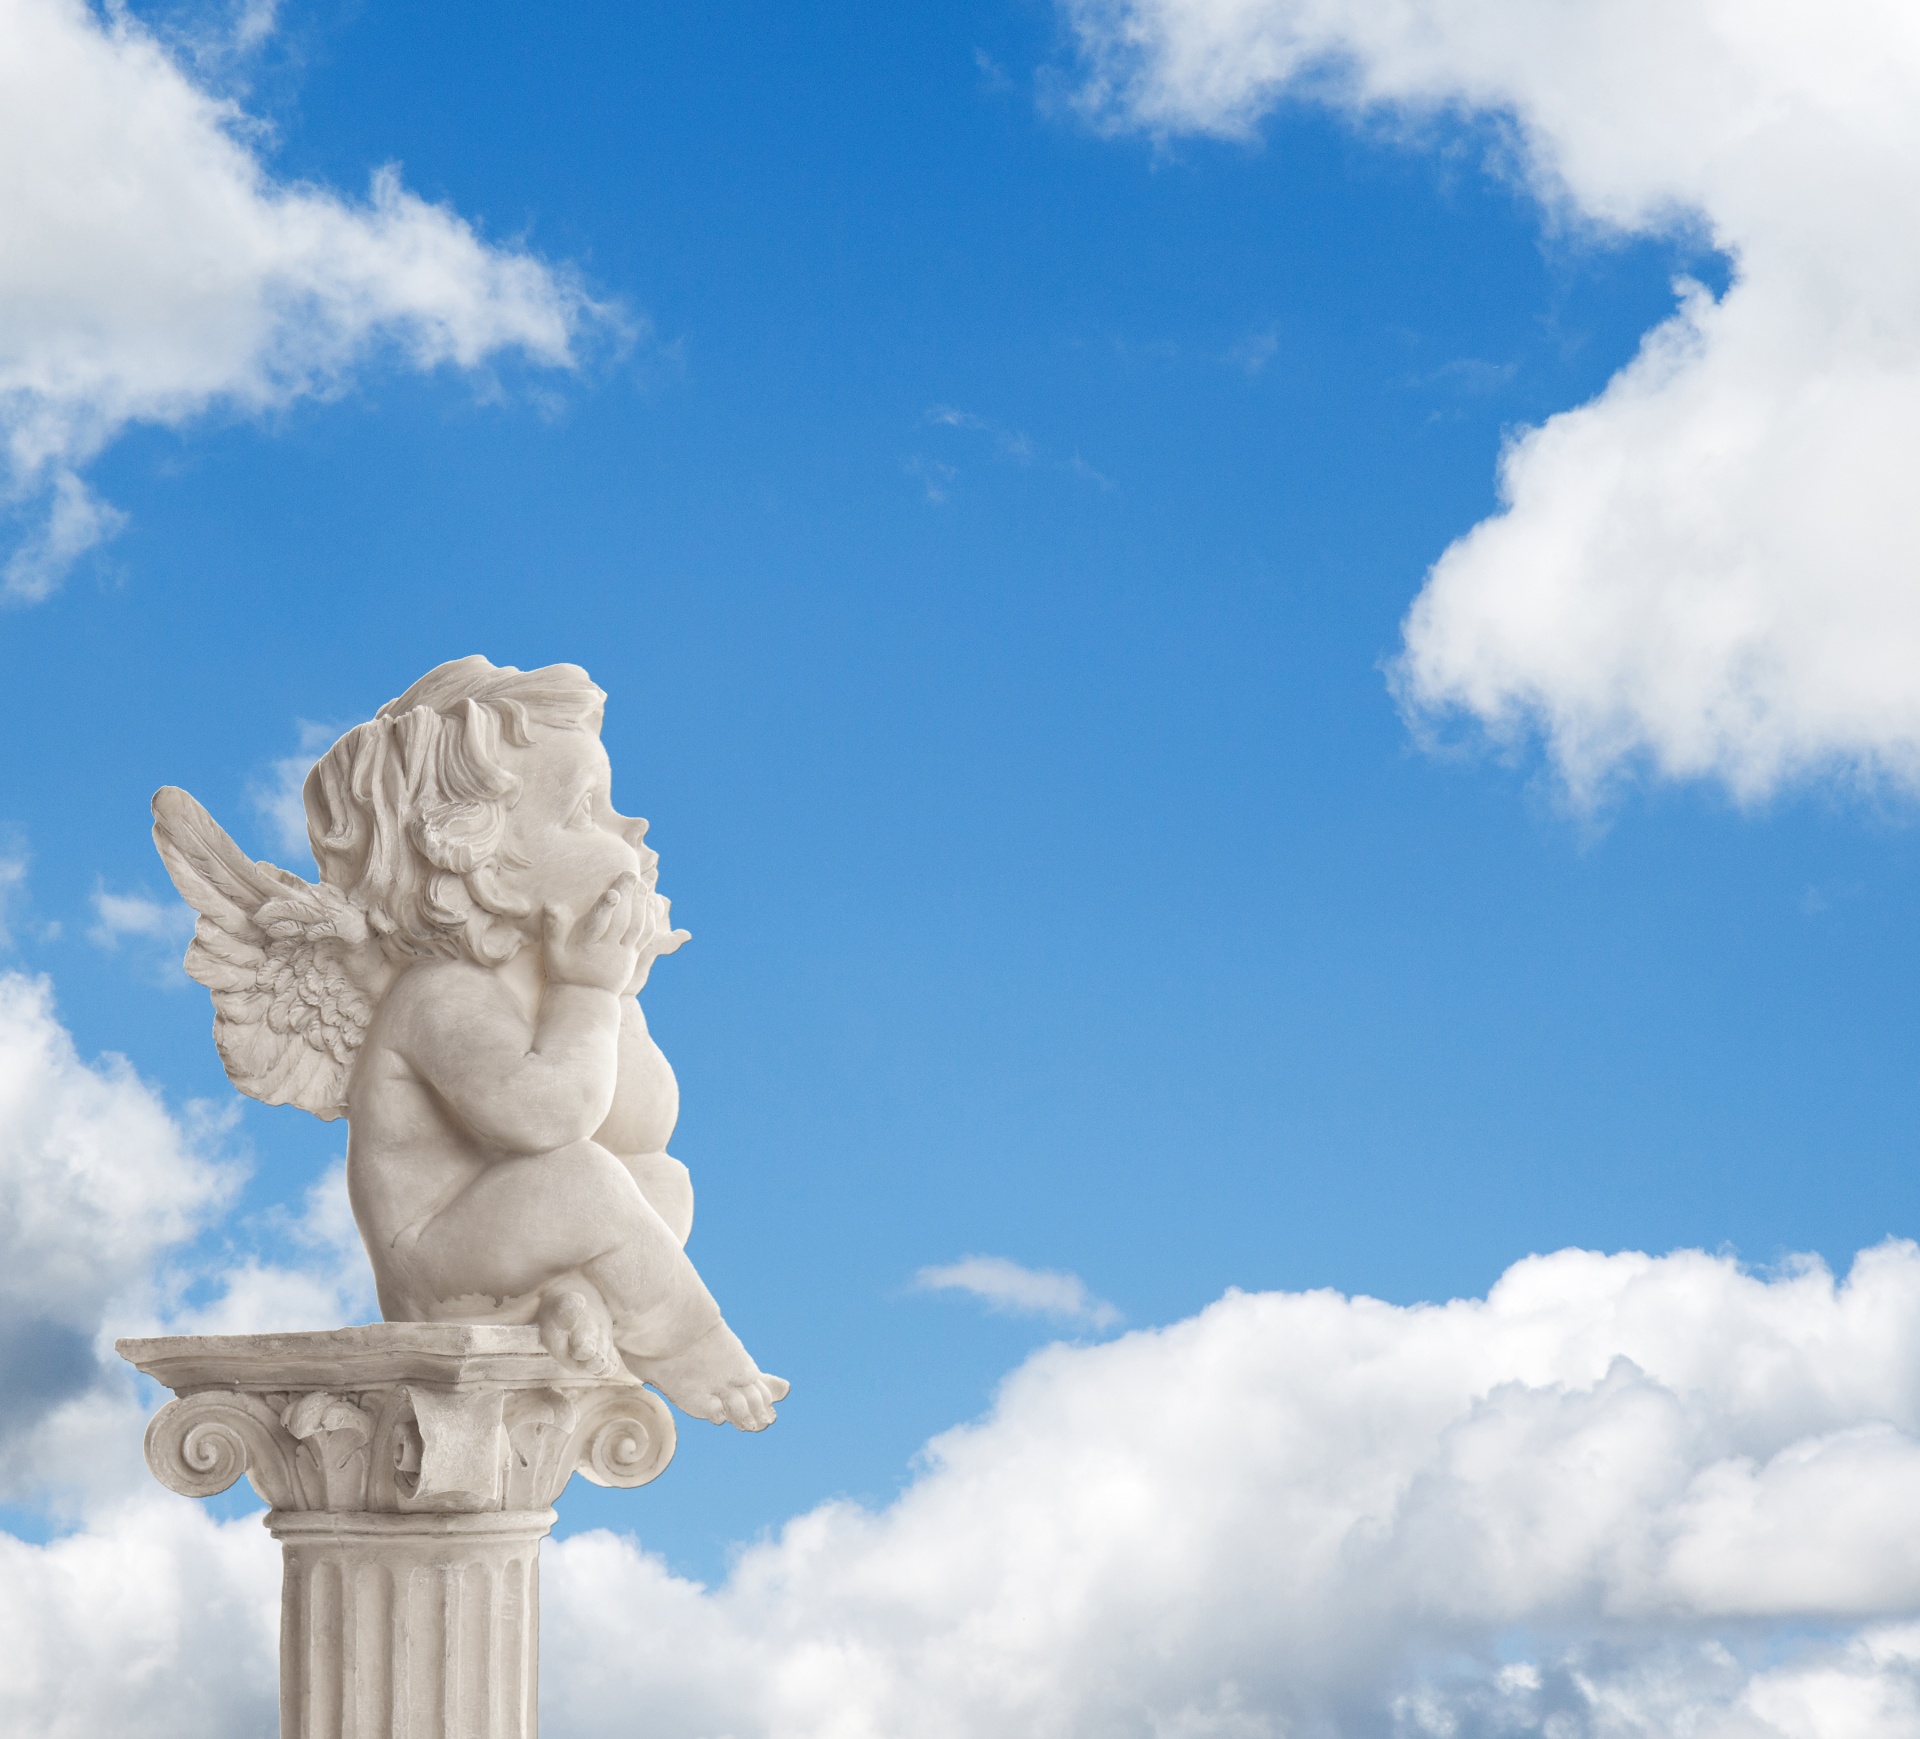 Angel statue in the clouds